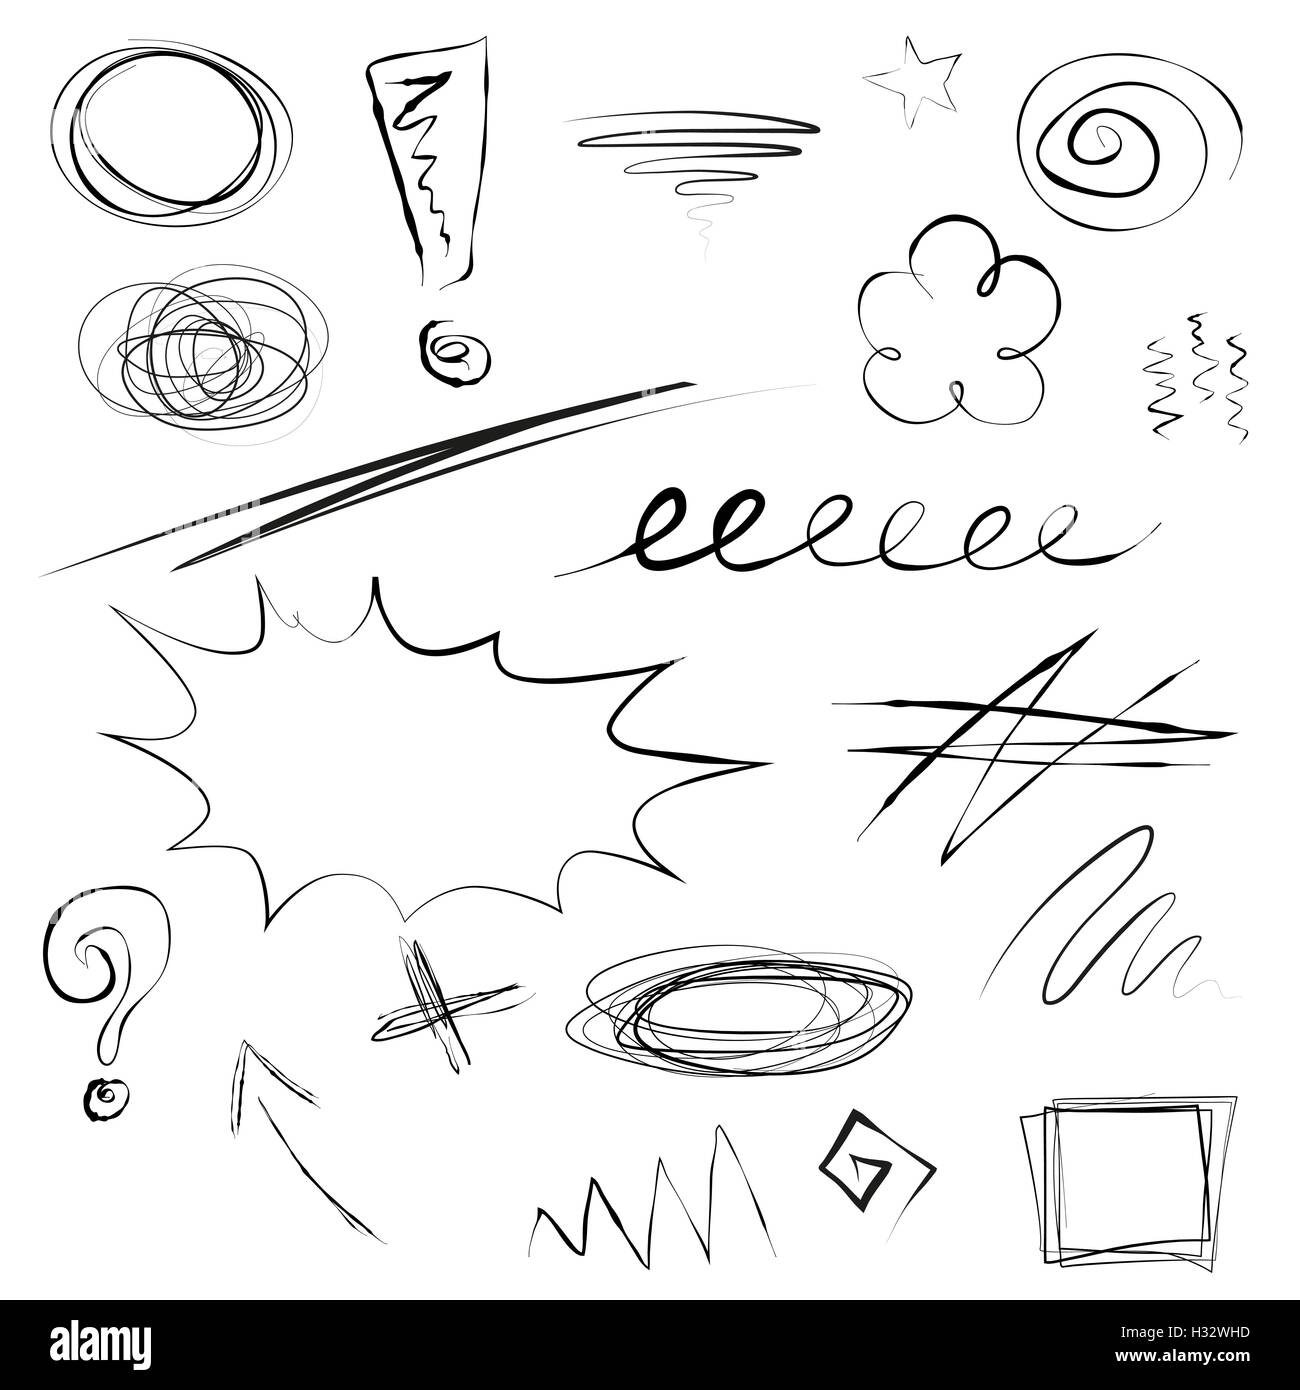 Set of scribbles, sketchy hand drawn frames, arrow, signs, underlines, loops, swirls, marks, cross, zigzag. Doodles isolated on white. Vector illustration. Stock Vector